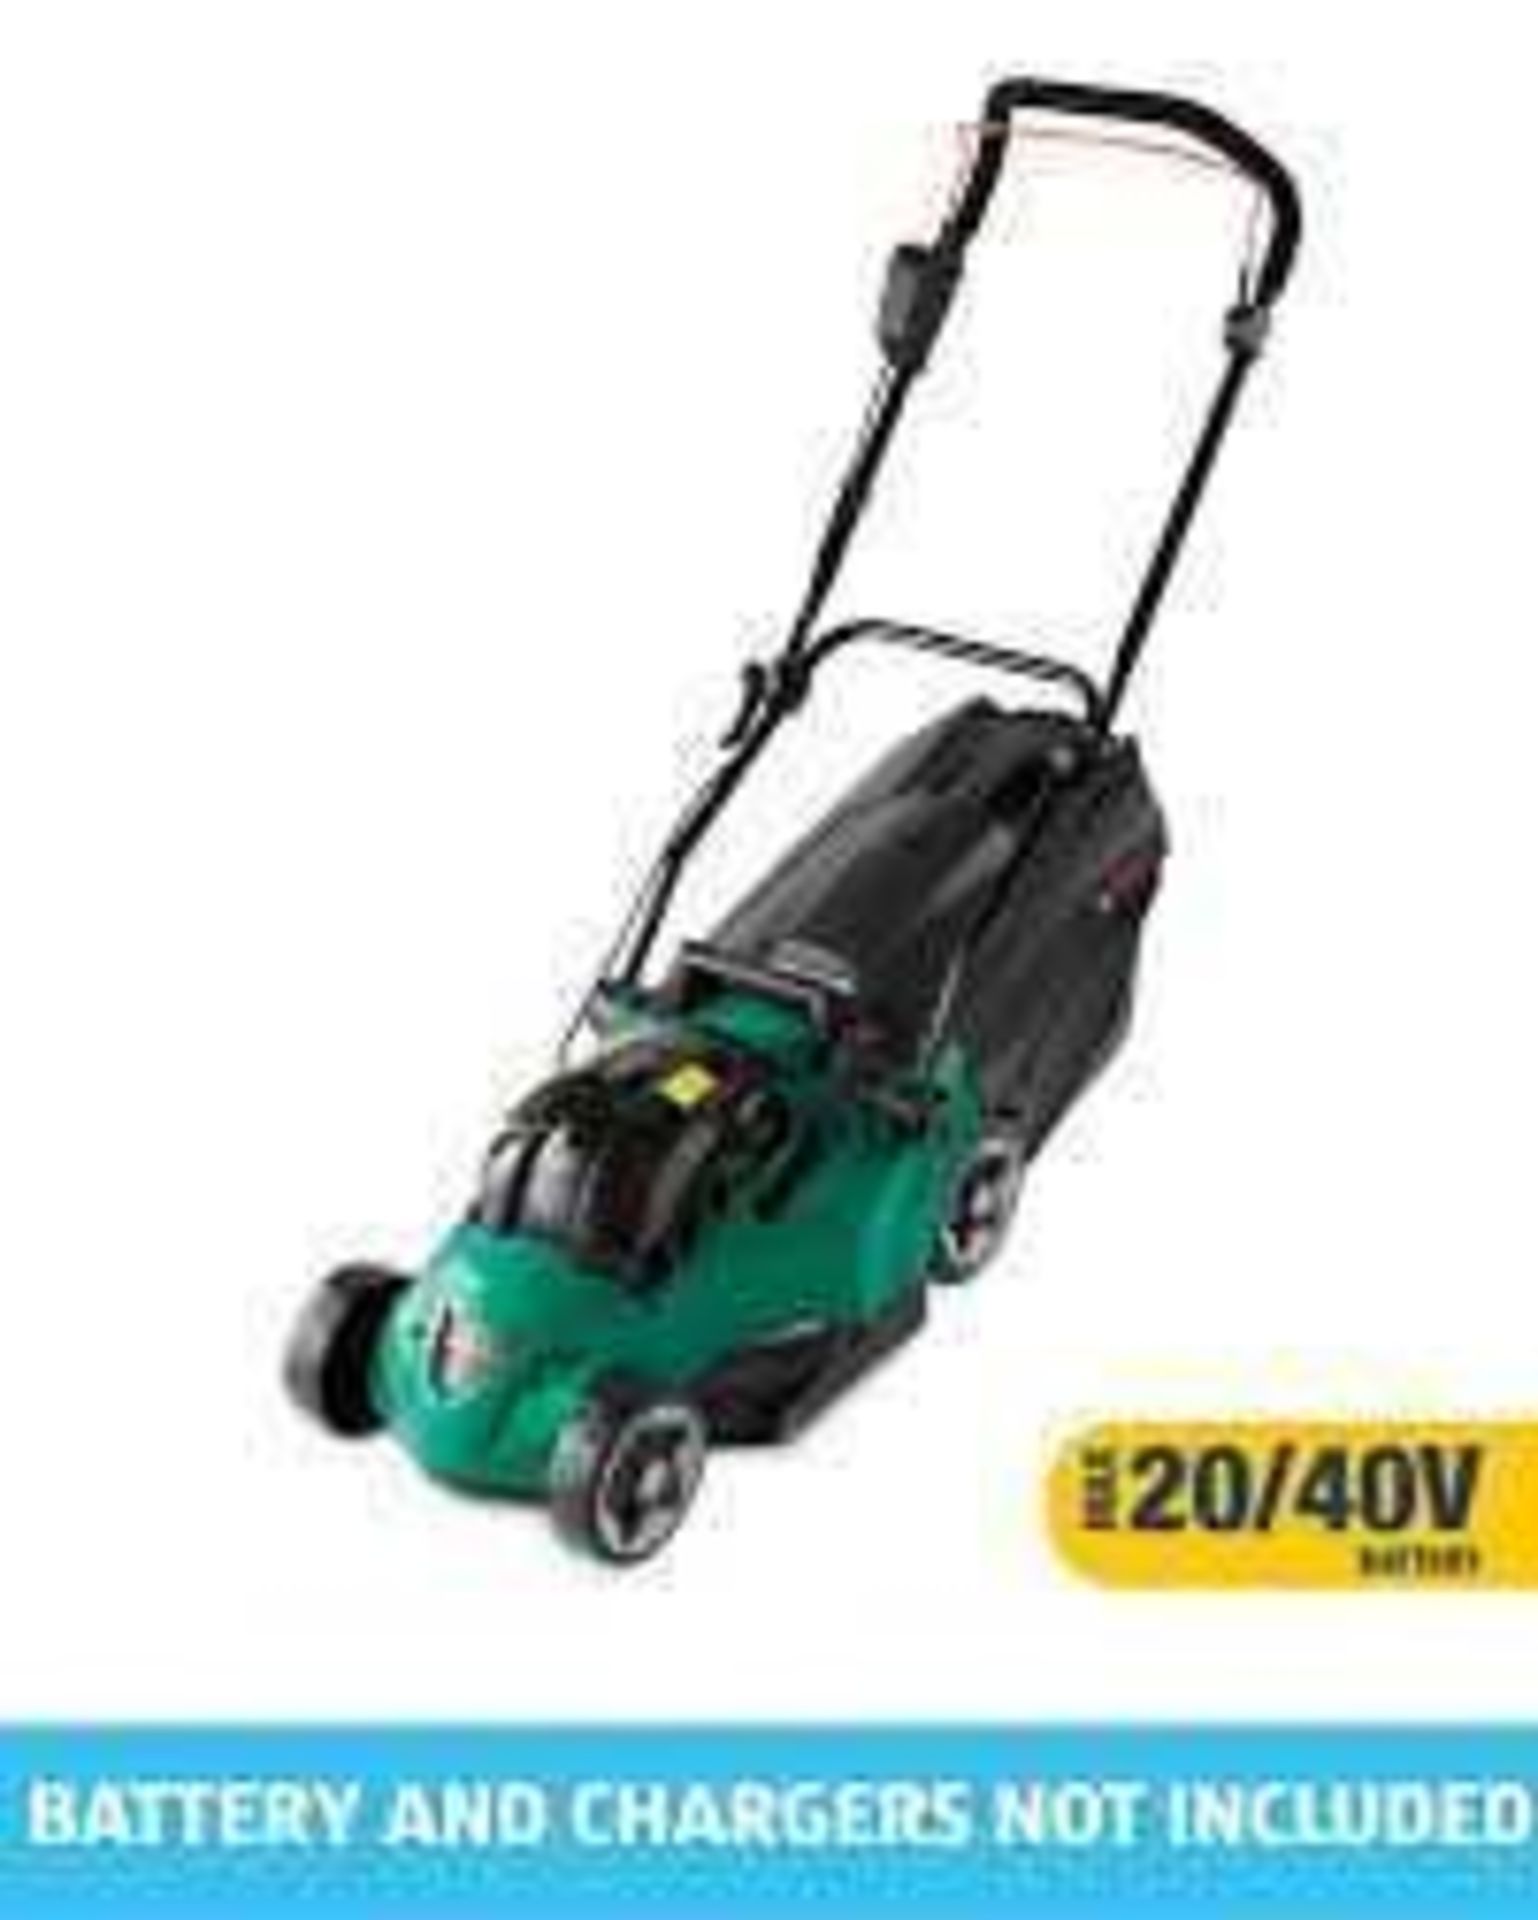 Combined RRP £120 Lot To Contain Two Boxed Ferrex 40 V Cordless Lawnmowers